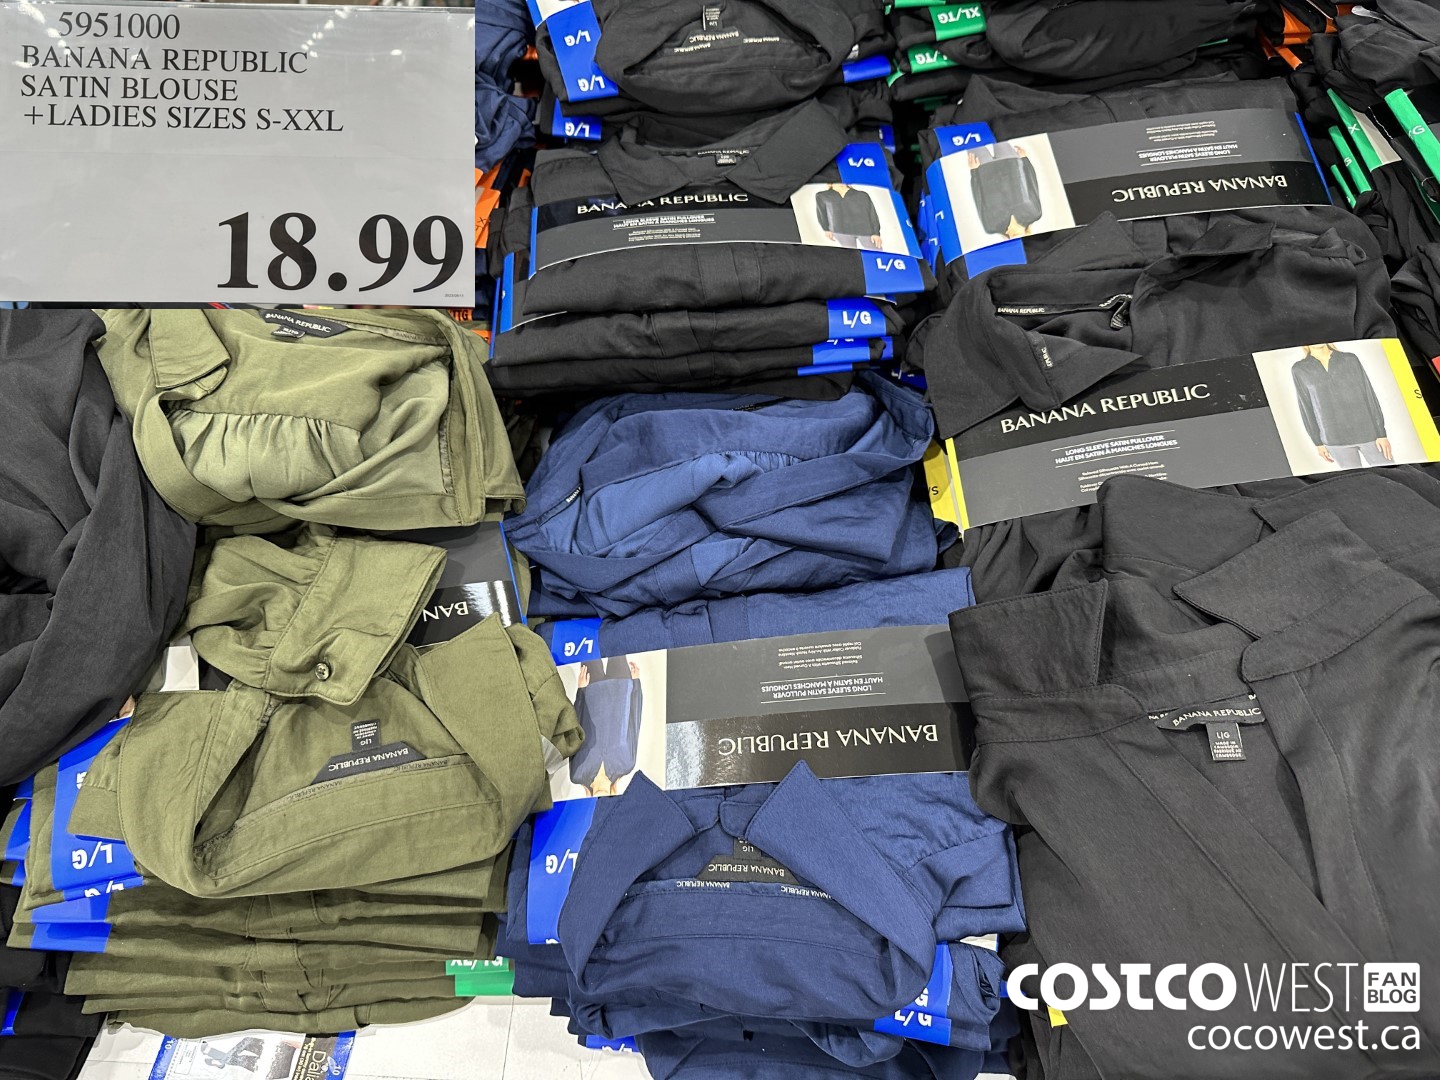 Costco's Best Clothing Brands: Calvin Klein, Banana Republic, and More